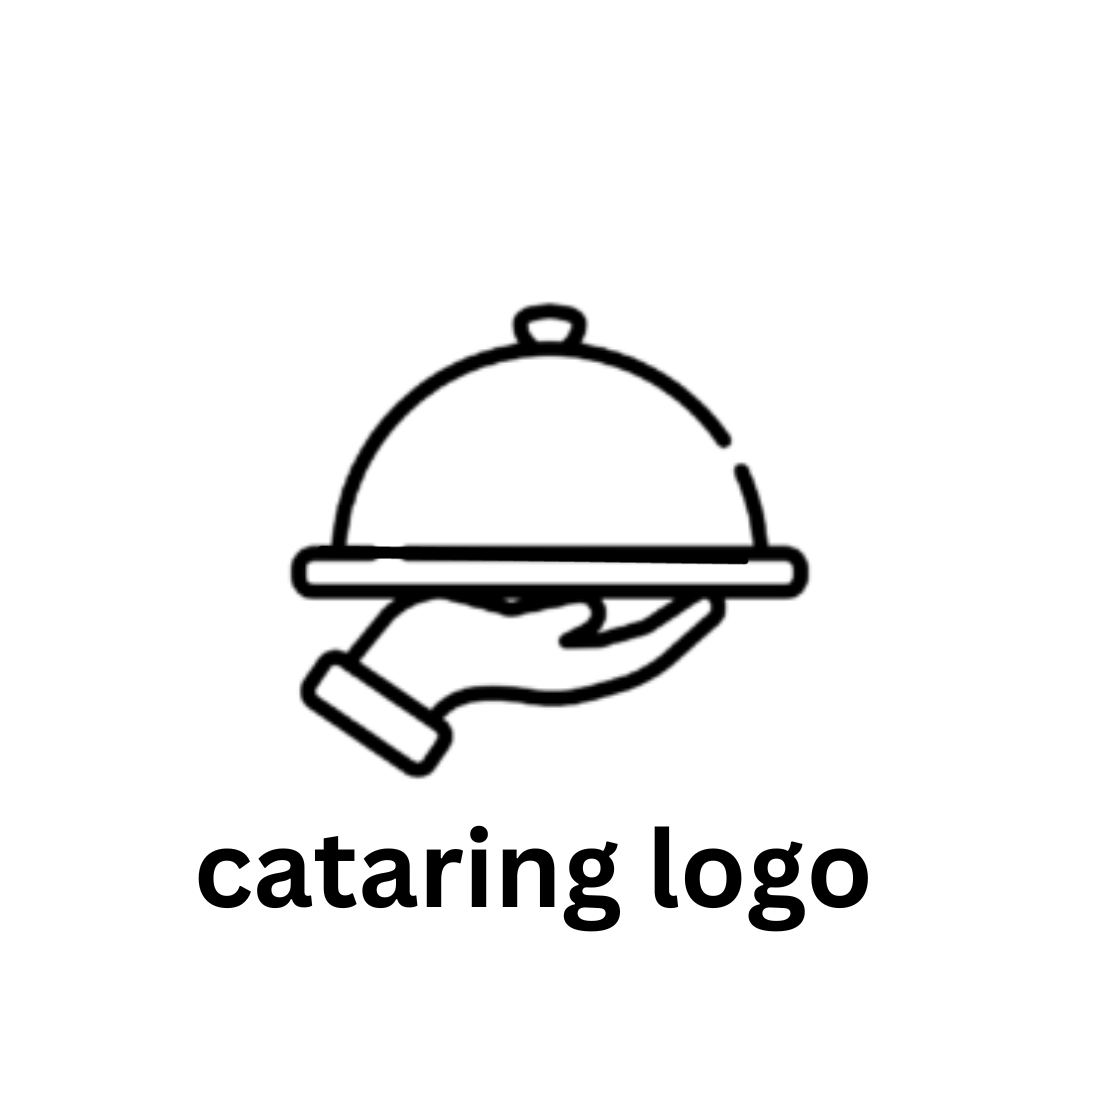 cataring logo preview image.